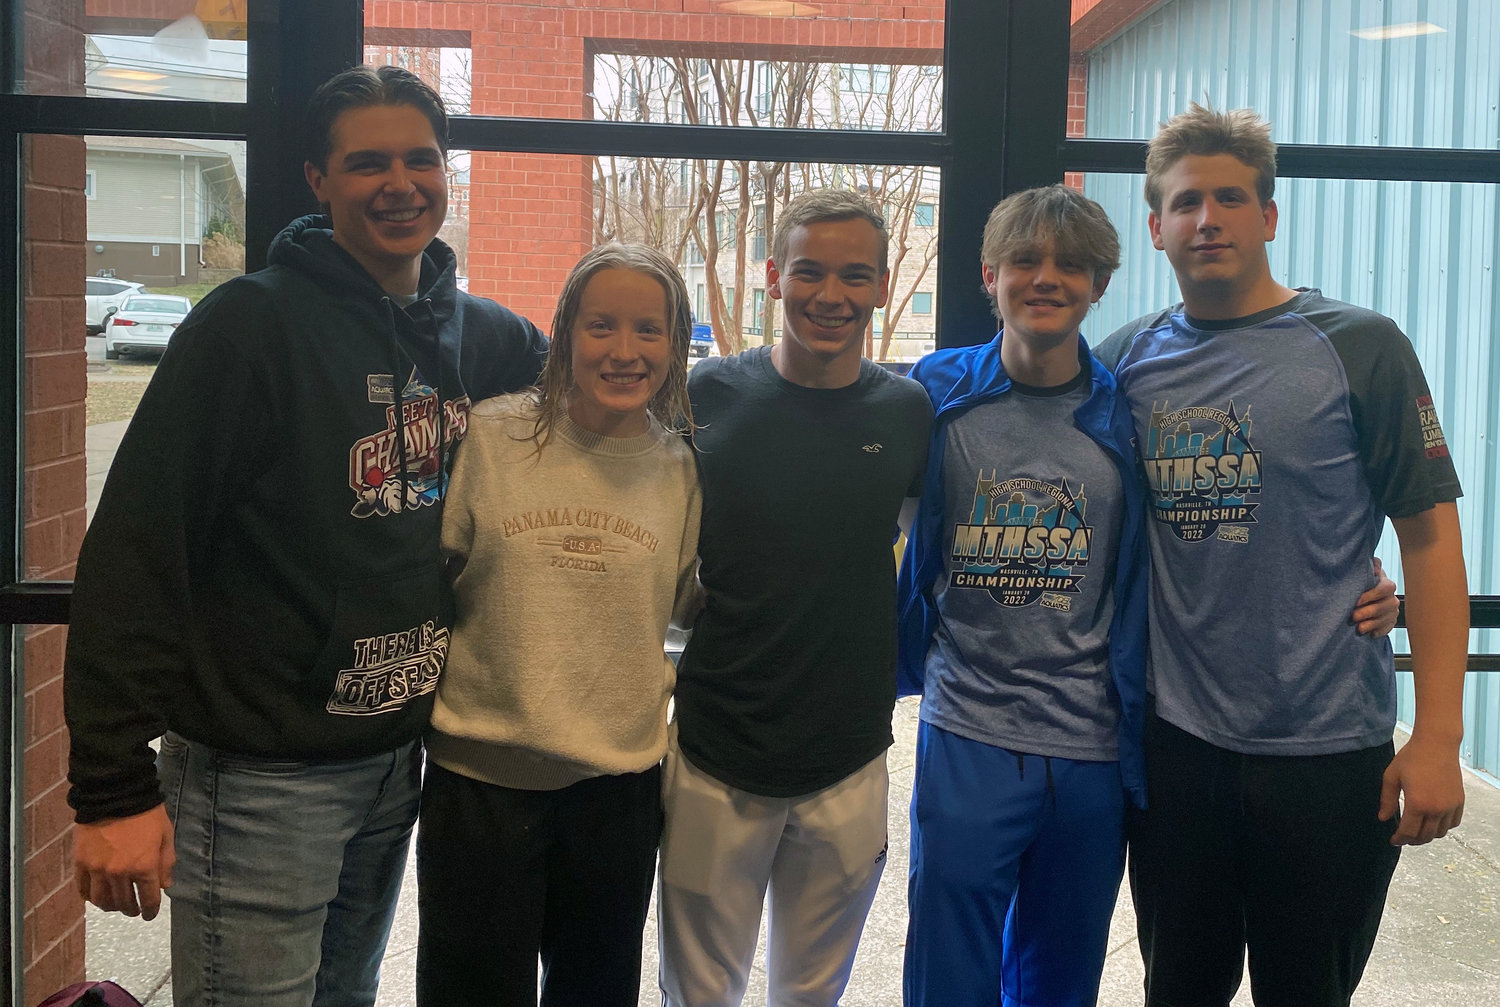 High school swimmers who competed in the region meet on Friday were Tyson Ries, Alli Wells, Hayden Milligan, Aidan Hurt and Tyler Kauffman.